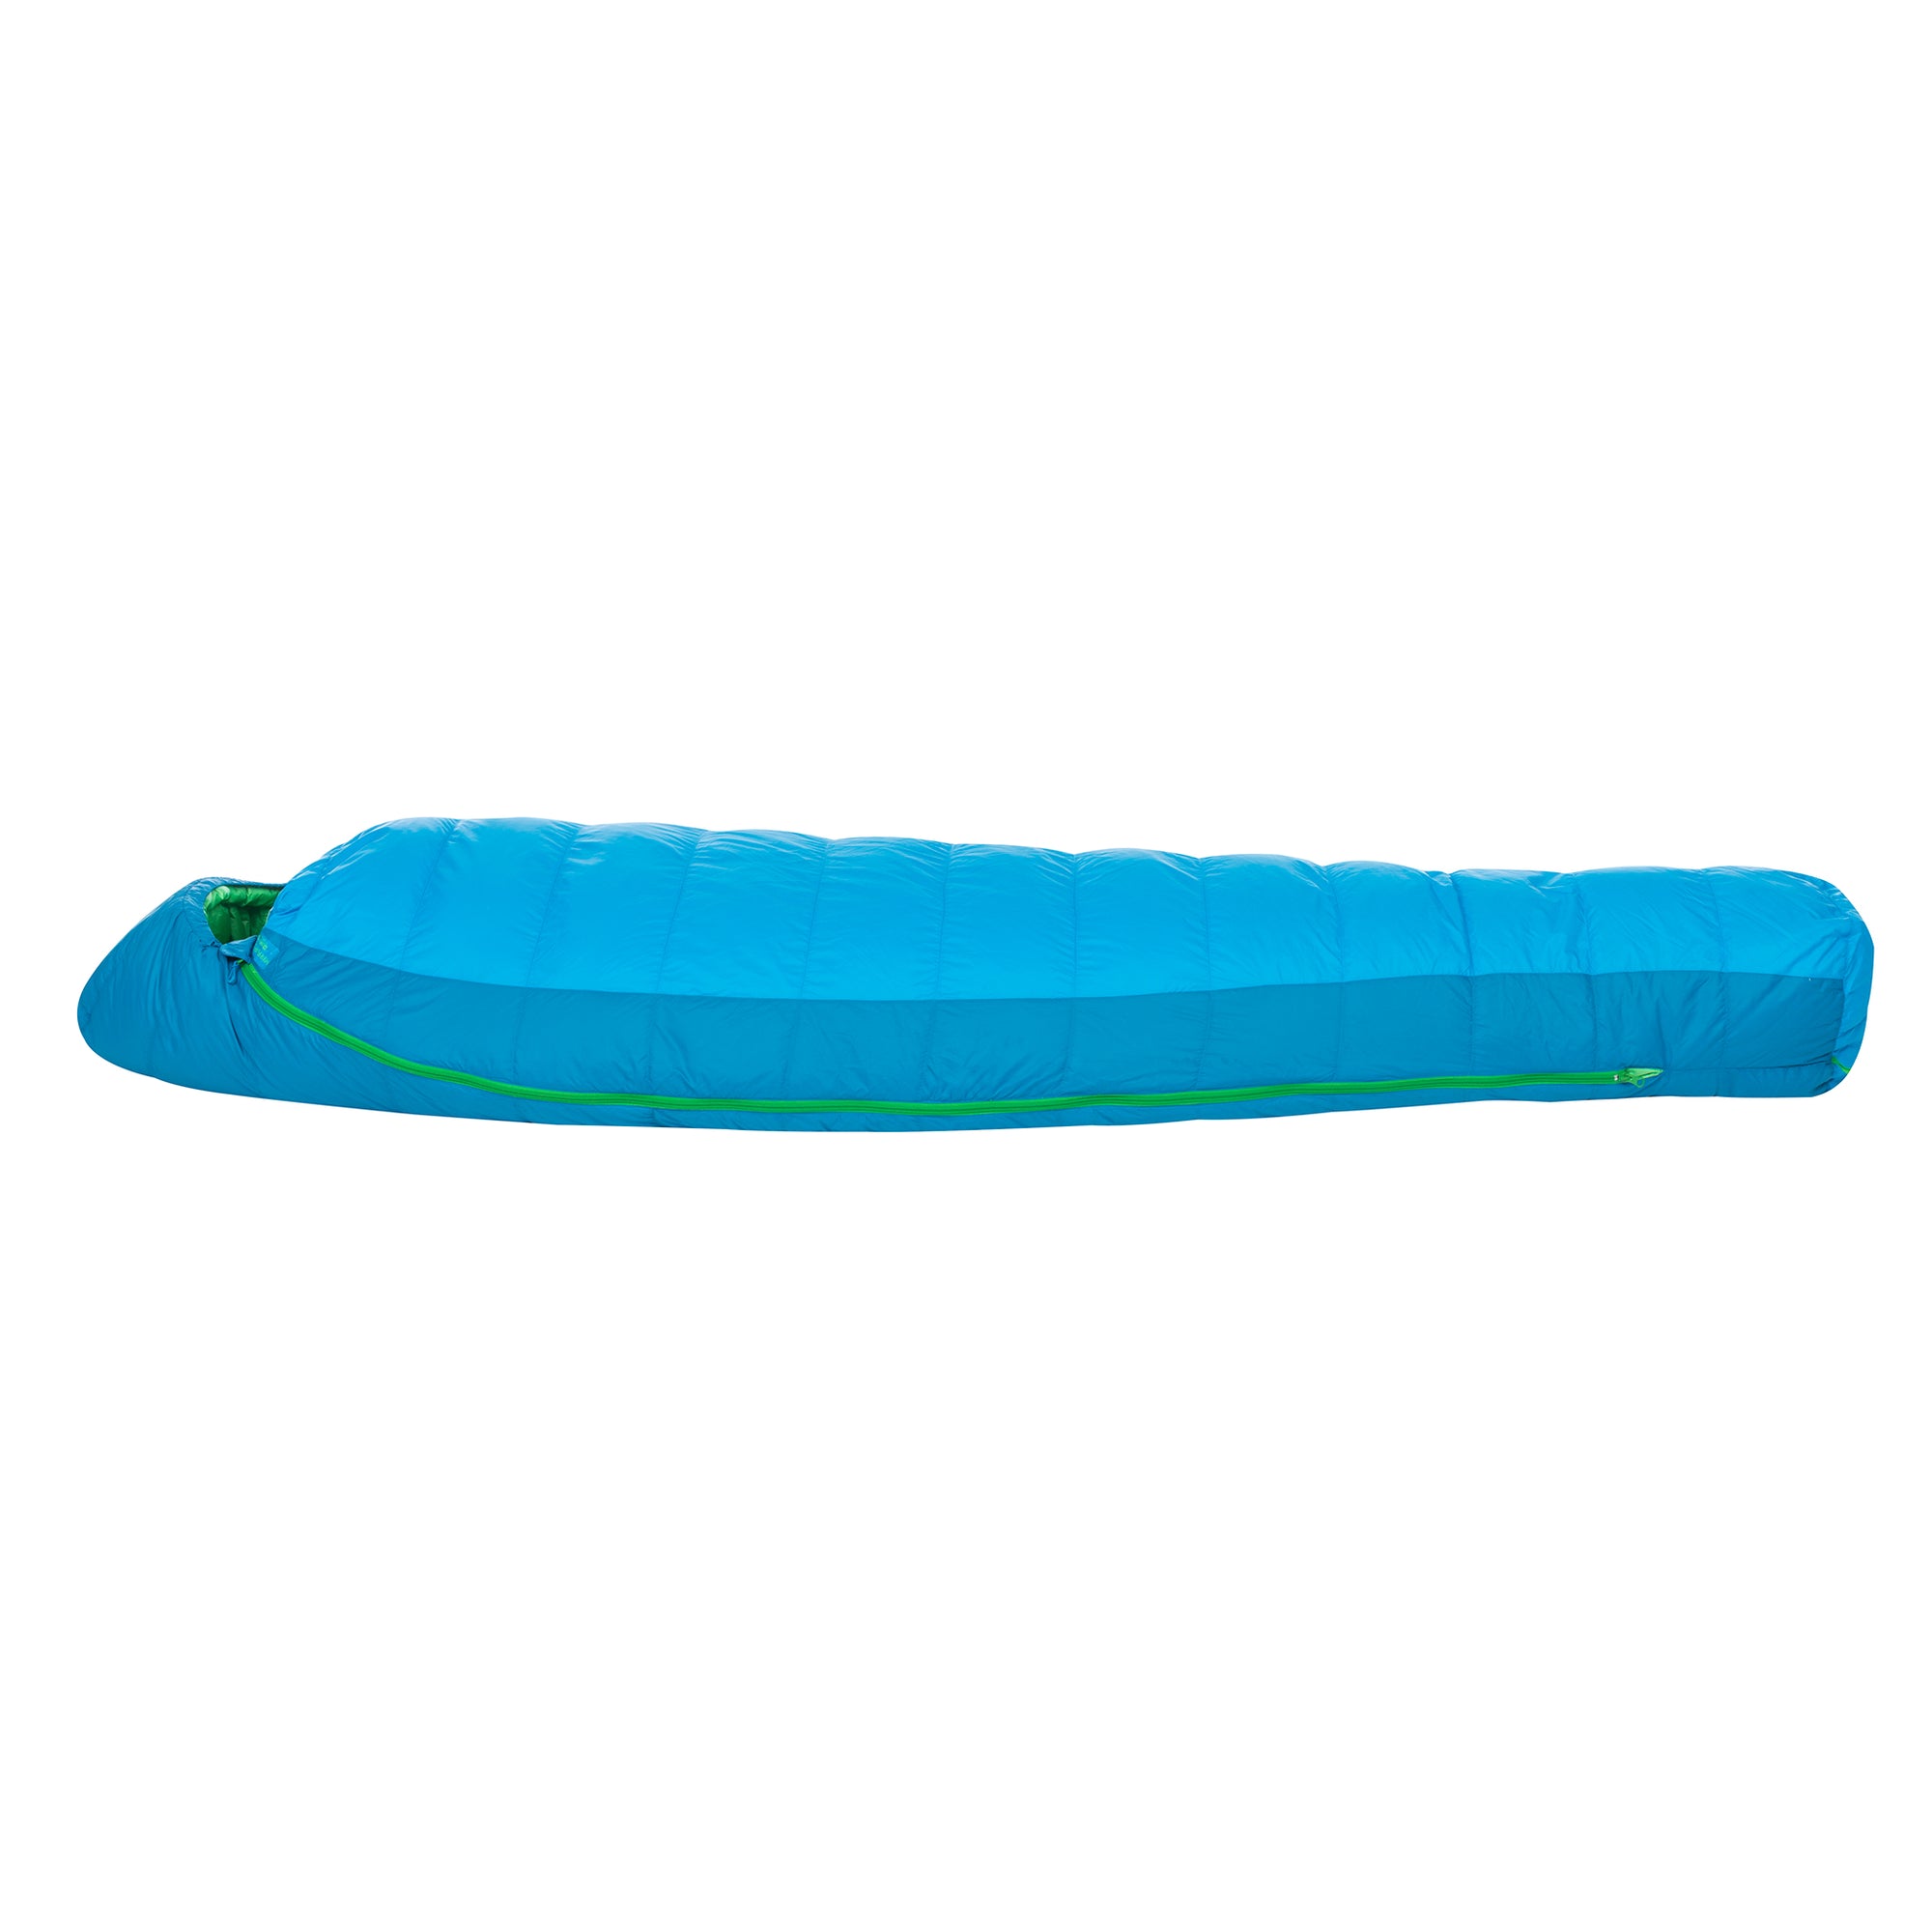 SIDE PROFILE OF THE MIRROR LAKE SLEEPING BAG LAYING FLAT, SHOWS RIGHT SIDE ZIPPER